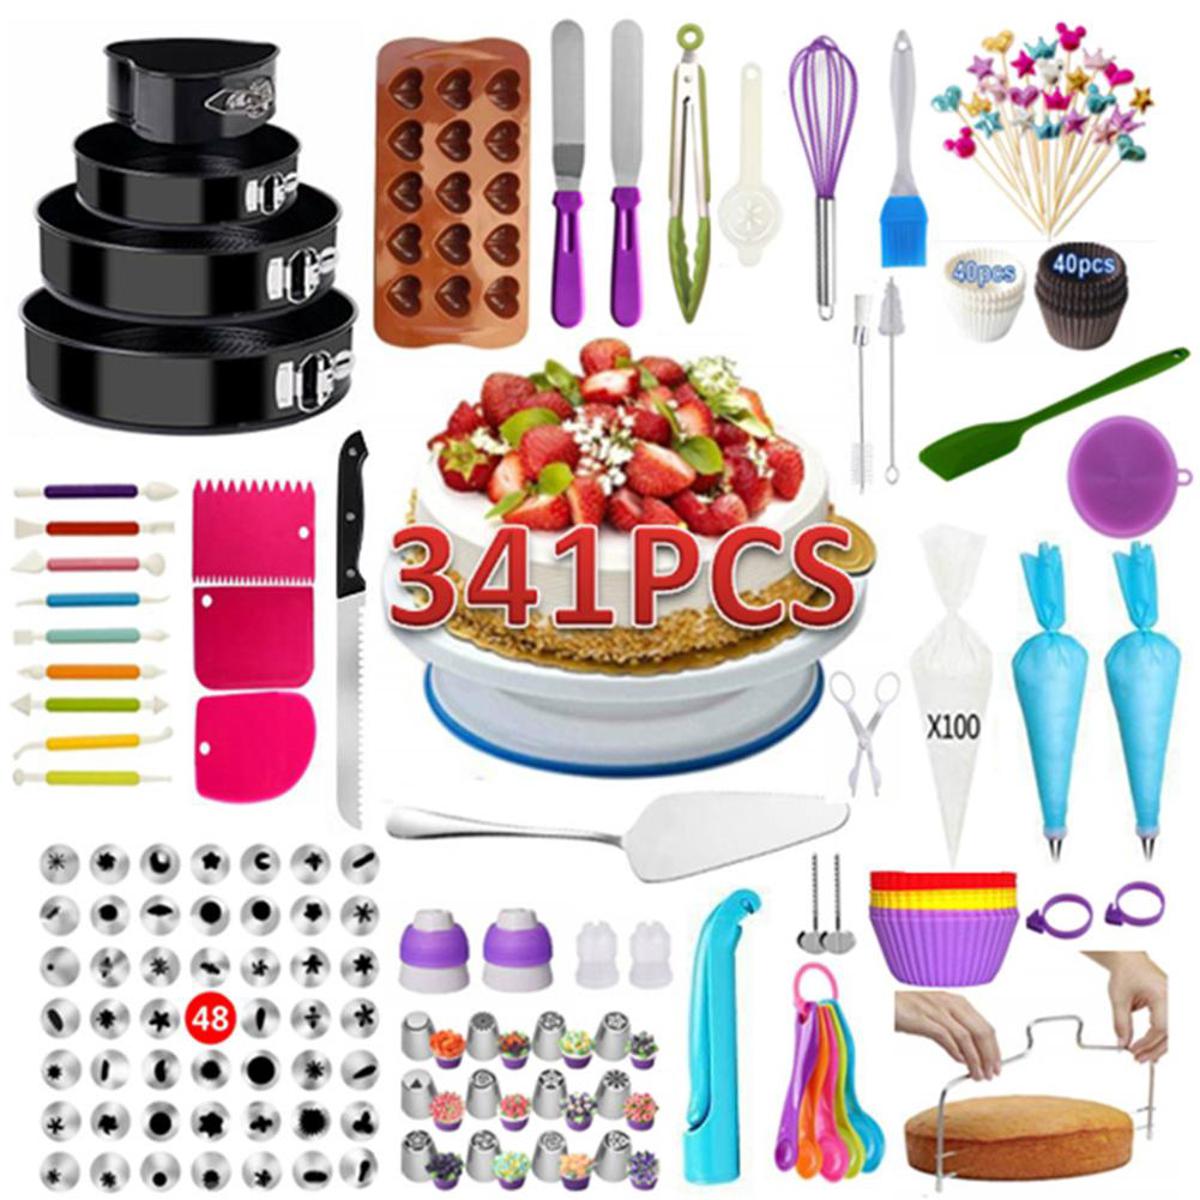 Cake Decorating Supplies | Oriental Trading Company